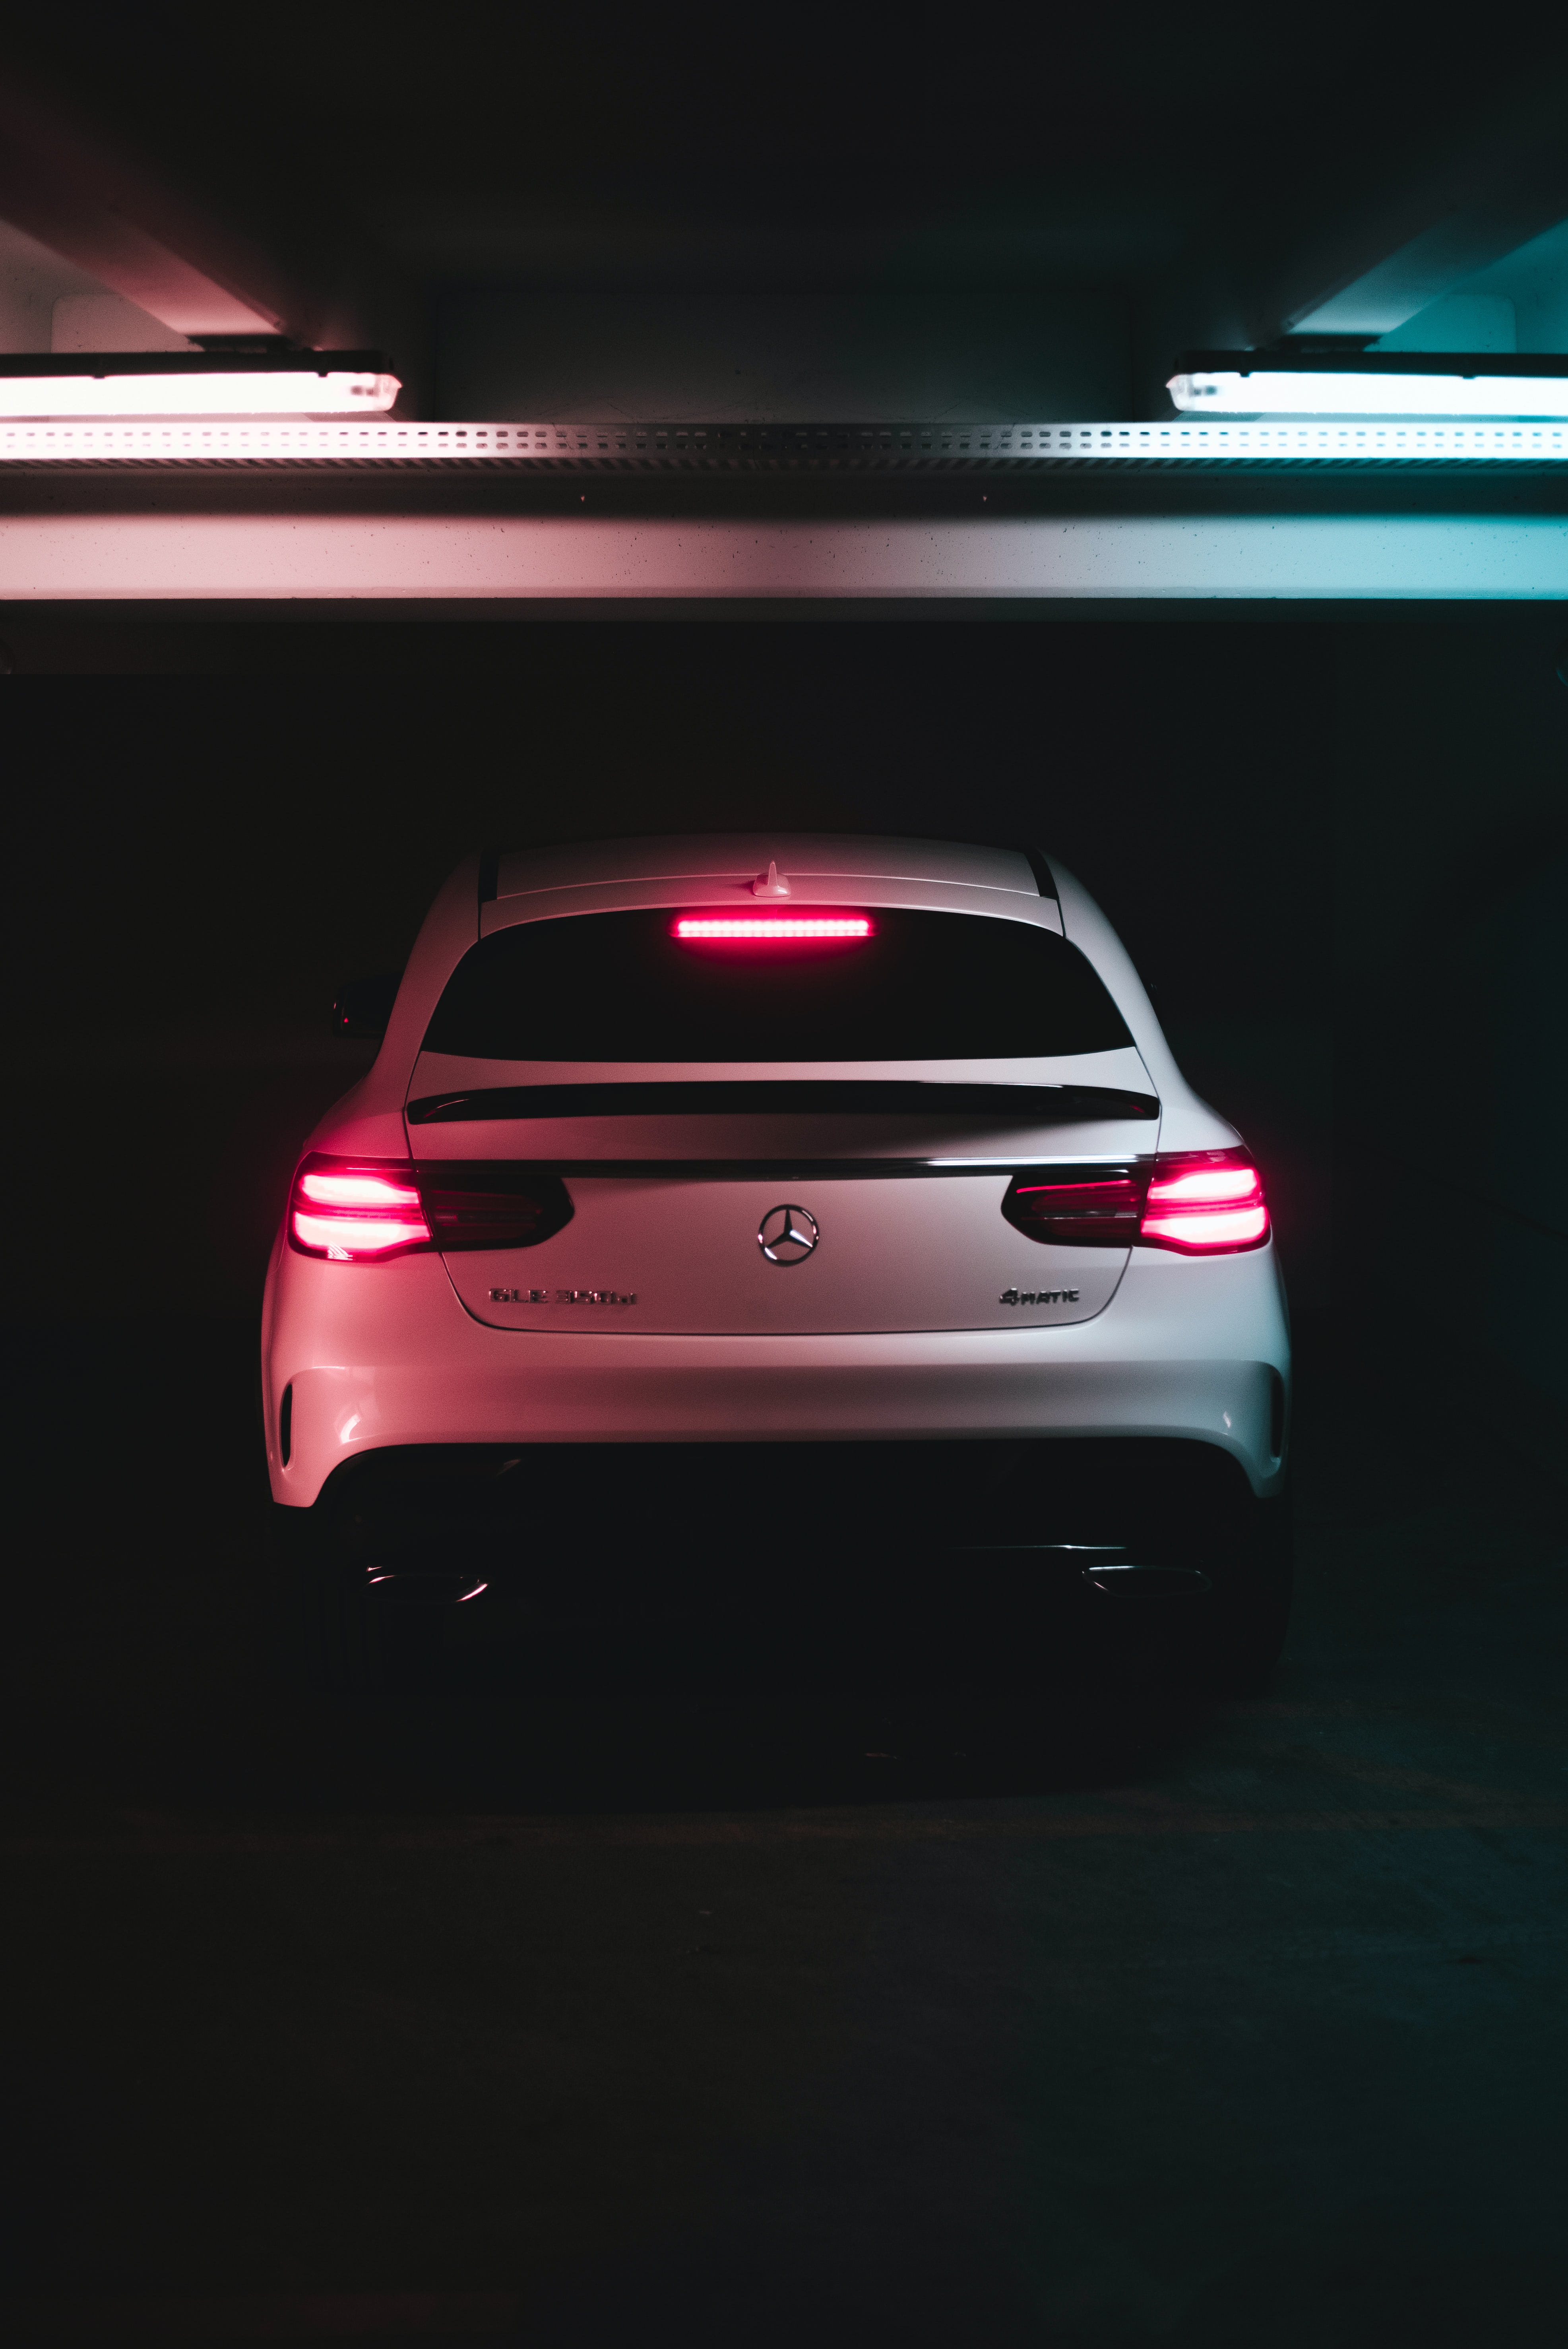 cars, lights, back view, rear view, mercedes benz gle 350d, mercedes, headlights wallpaper for mobile